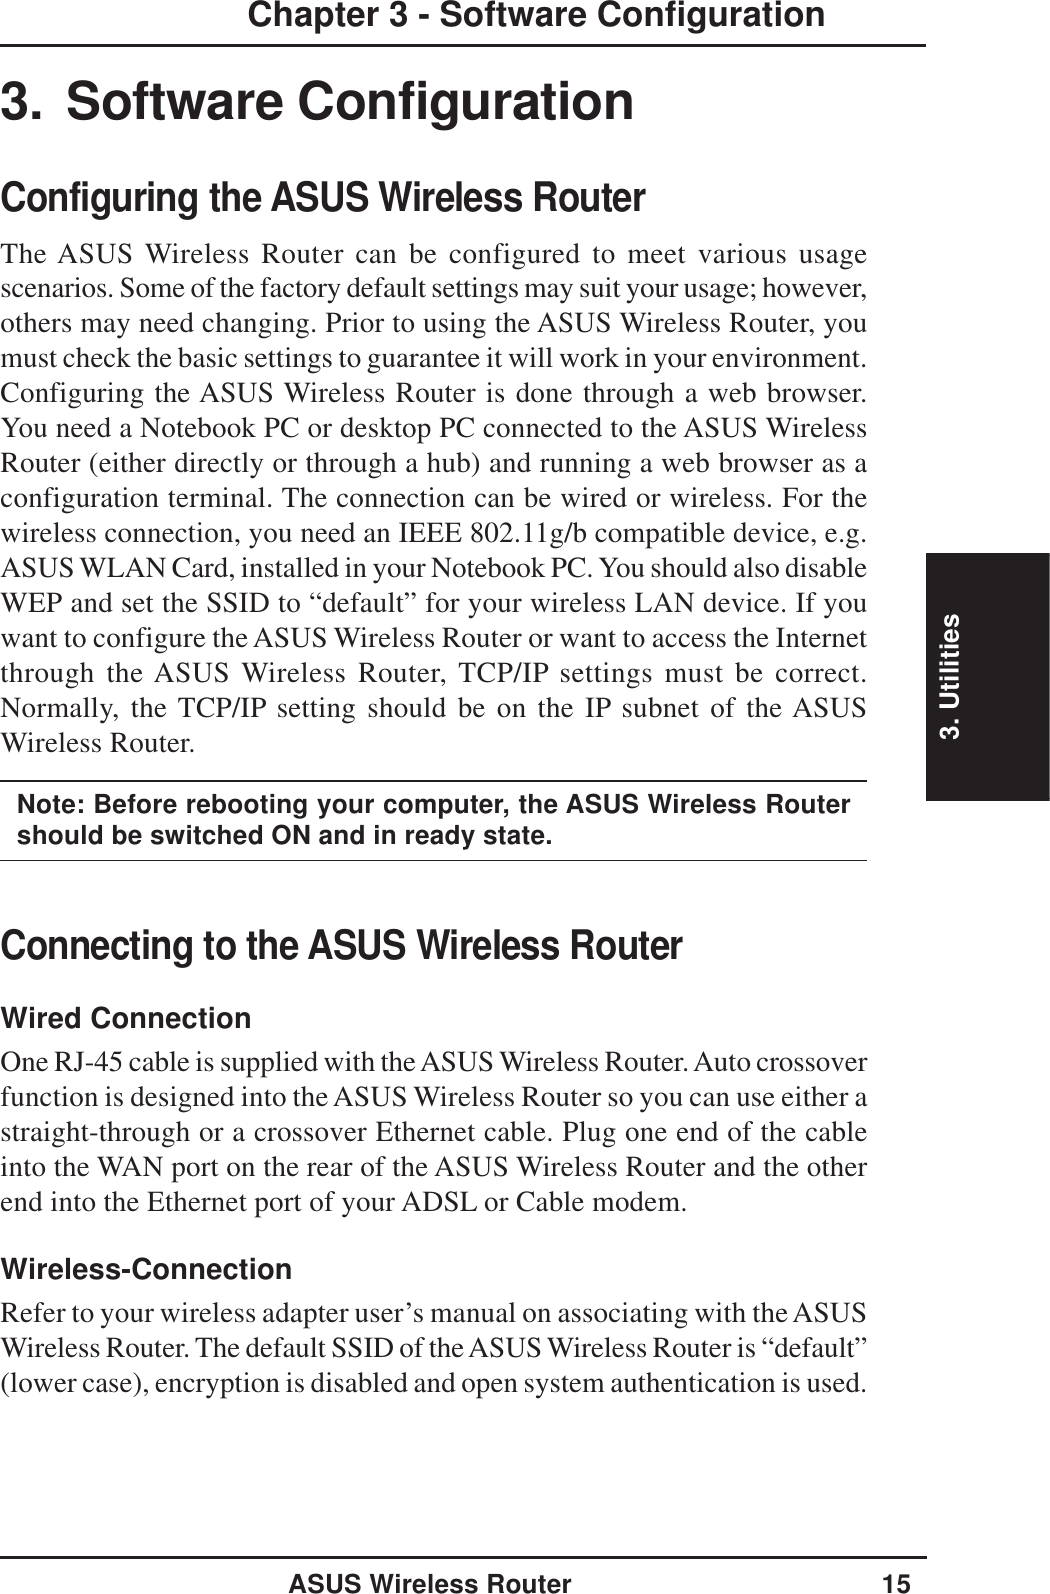 3. UtilitiesASUS Wireless Router 15Chapter 3 - Software Configuration3. Software ConfigurationConfiguring the ASUS Wireless RouterThe ASUS Wireless Router can be configured to meet various usagescenarios. Some of the factory default settings may suit your usage; however,others may need changing. Prior to using the ASUS Wireless Router, youmust check the basic settings to guarantee it will work in your environment.Configuring the ASUS Wireless Router is done through a web browser.You need a Notebook PC or desktop PC connected to the ASUS WirelessRouter (either directly or through a hub) and running a web browser as aconfiguration terminal. The connection can be wired or wireless. For thewireless connection, you need an IEEE 802.11g/b compatible device, e.g.ASUS WLAN Card, installed in your Notebook PC. You should also disableWEP and set the SSID to “default” for your wireless LAN device. If youwant to configure the ASUS Wireless Router or want to access the Internetthrough the ASUS Wireless Router, TCP/IP settings must be correct.Normally, the TCP/IP setting should be on the IP subnet of the ASUSWireless Router.Note: Before rebooting your computer, the ASUS Wireless Routershould be switched ON and in ready state.Connecting to the ASUS Wireless RouterWired ConnectionOne RJ-45 cable is supplied with the ASUS Wireless Router. Auto crossoverfunction is designed into the ASUS Wireless Router so you can use either astraight-through or a crossover Ethernet cable. Plug one end of the cableinto the WAN port on the rear of the ASUS Wireless Router and the otherend into the Ethernet port of your ADSL or Cable modem.Wireless-ConnectionRefer to your wireless adapter user’s manual on associating with the ASUSWireless Router. The default SSID of the ASUS Wireless Router is “default”(lower case), encryption is disabled and open system authentication is used.